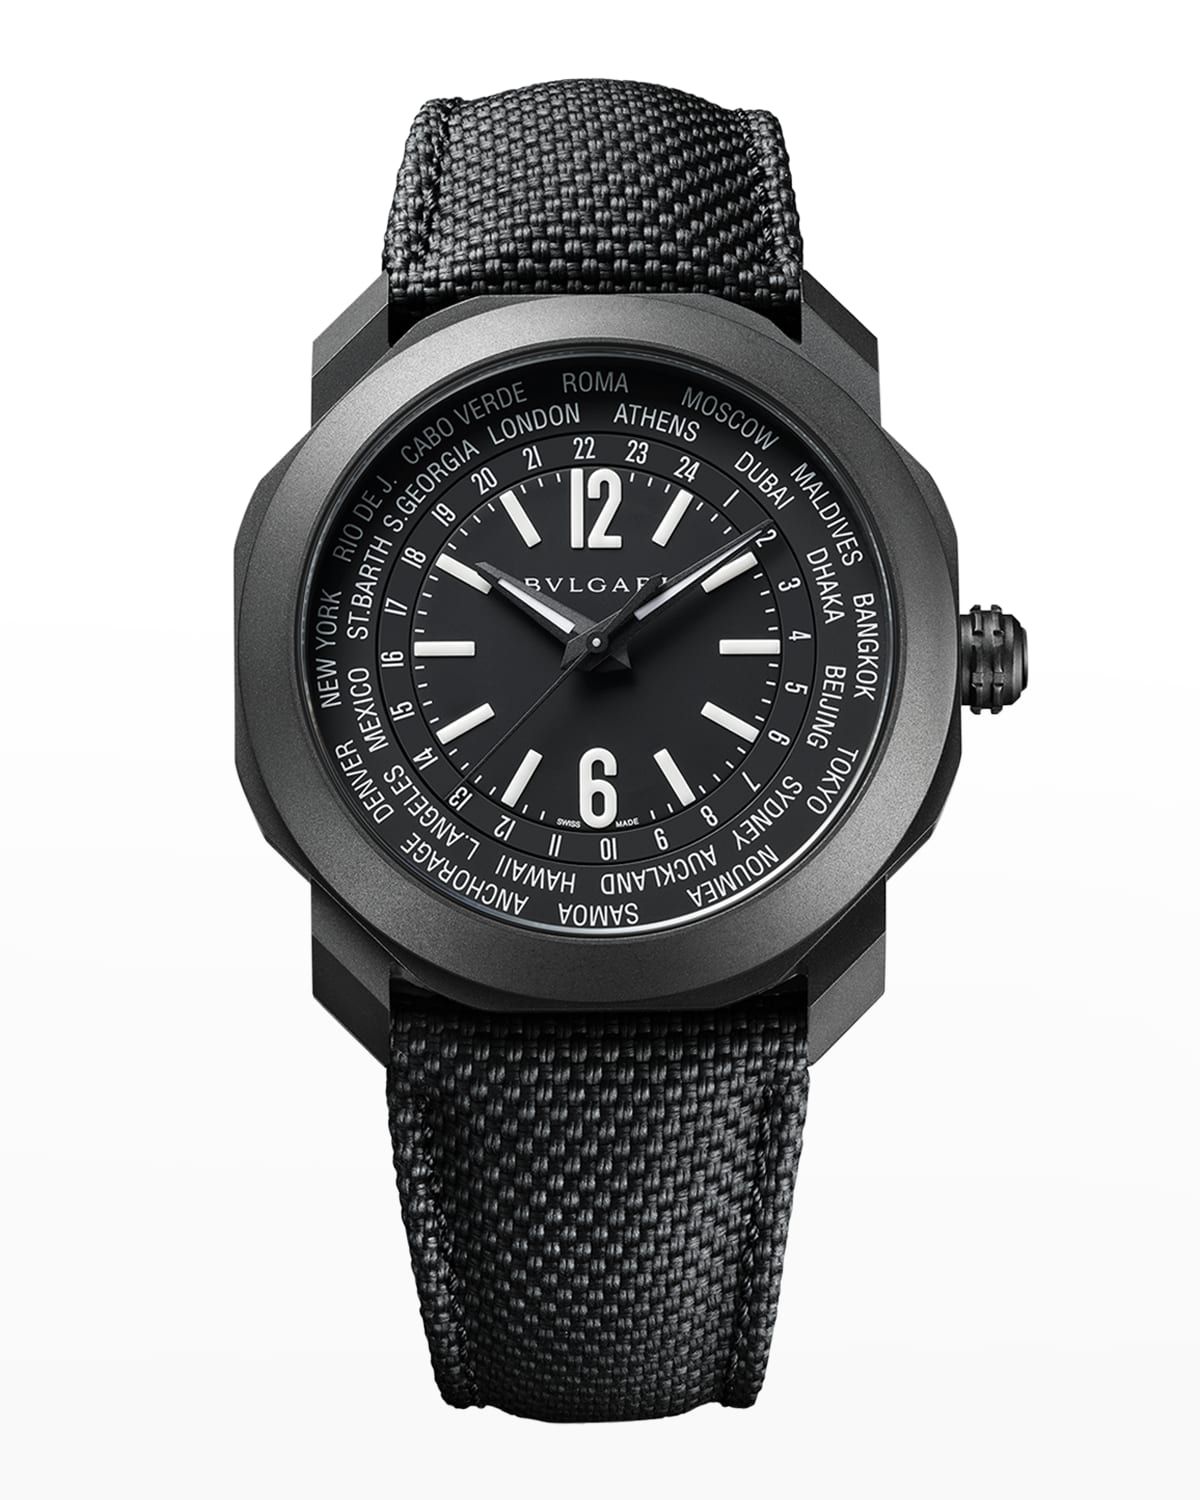 Men's Octo Roma World Timer Watch in All Black